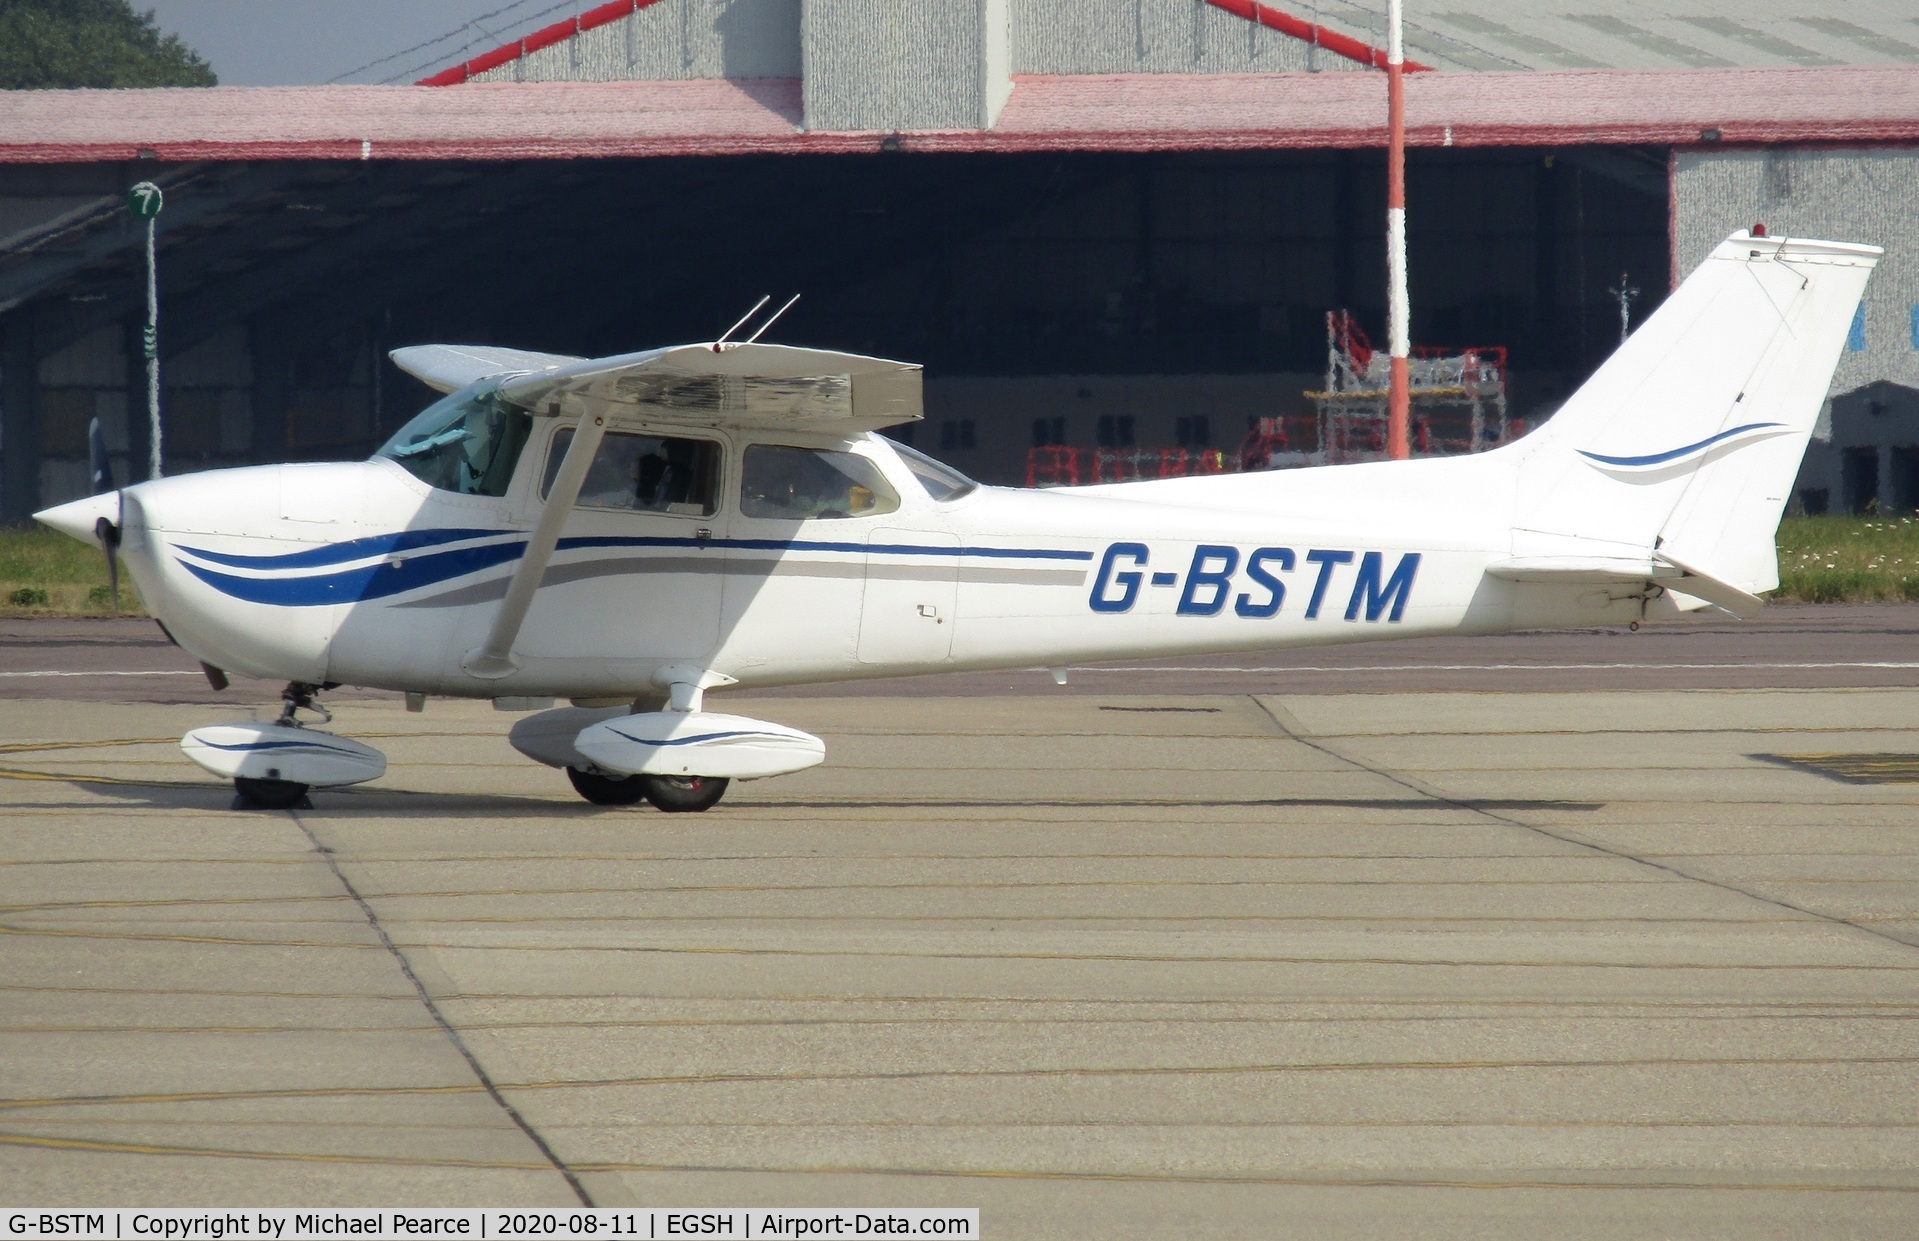 G-BSTM, 1972 Cessna 172L C/N 172-60143, Parked at SaxonAir on a visit from Duxford (QFO).